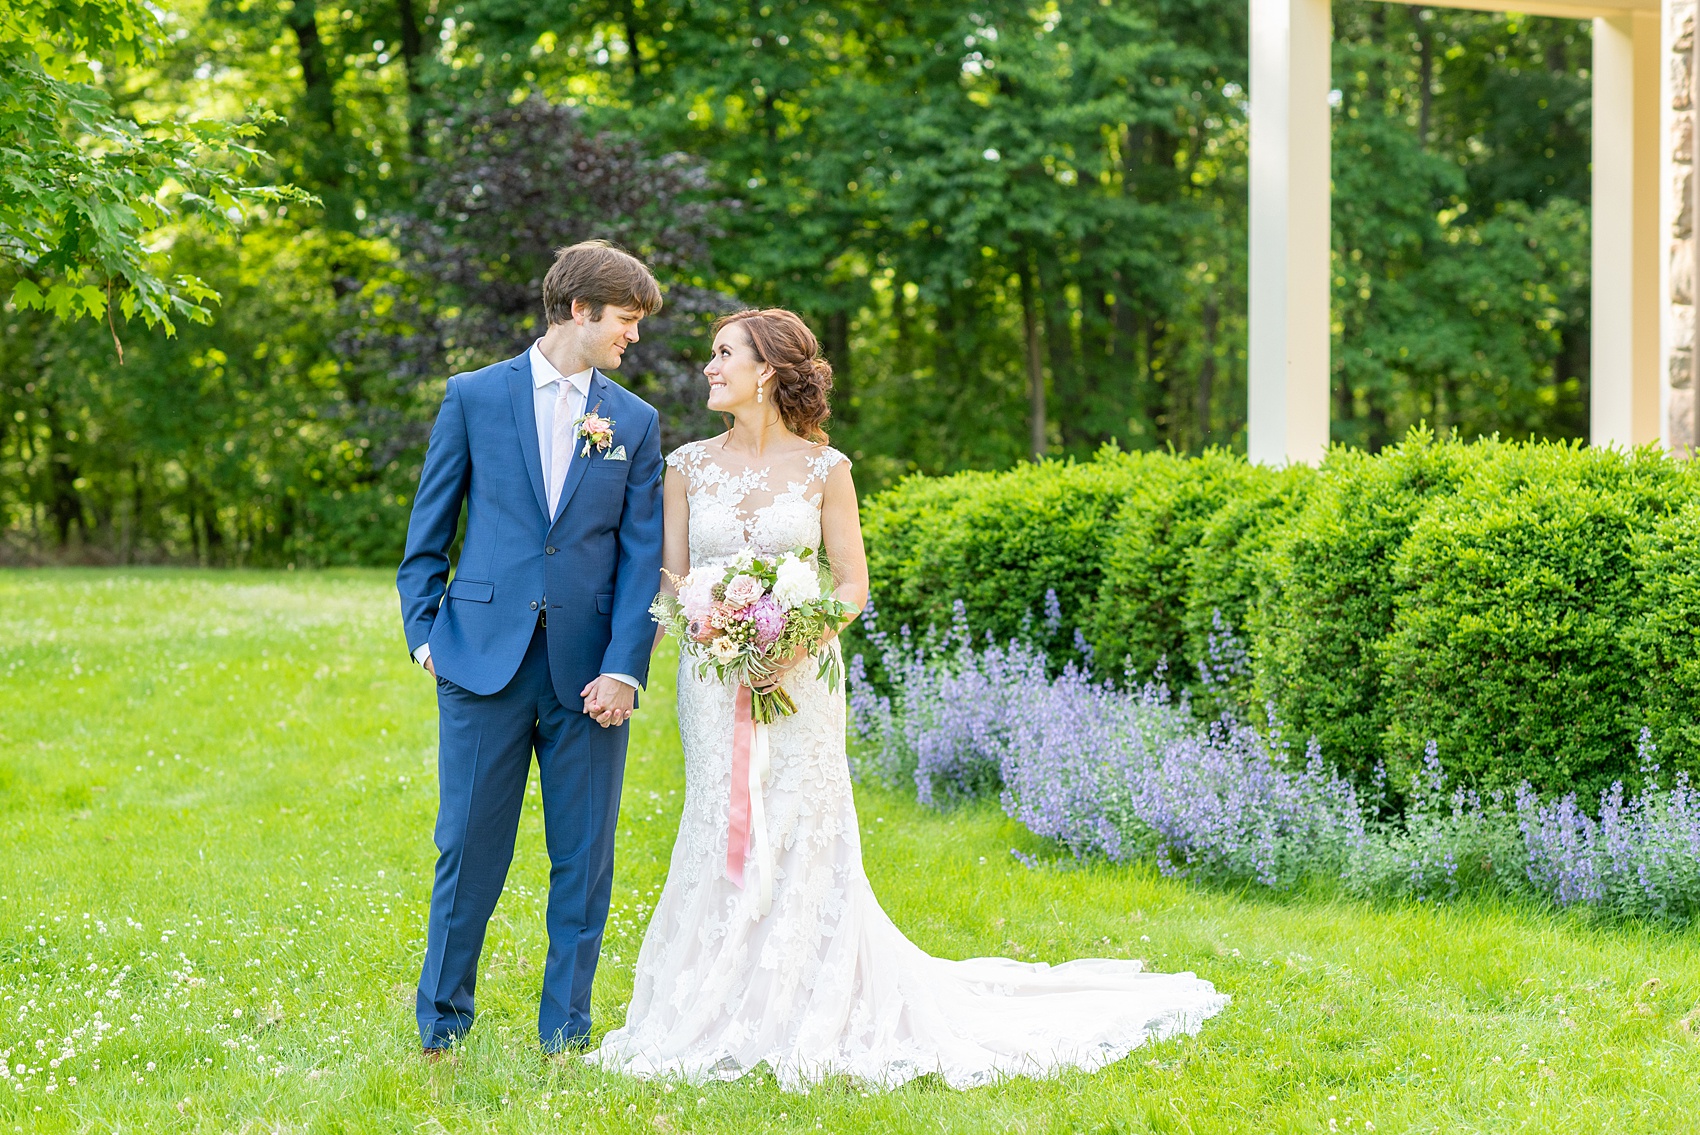 A summer wedding at Olde Mill Inn, NJ. Photos by Mikkel Paige Photography for an event with pink and blue details. The bride and groom chose to have their photos taken at Cross Estate Gardens, just down the road from this New Jersey Venue. Click through for their complete wedding recap! #OldeMillInn #NJwedding #NJweddingphotographer #mikkelpaige #NewJerseyWeddingVenue #NewJerseyWedding #CrossEstateGardens #brideandgroom 